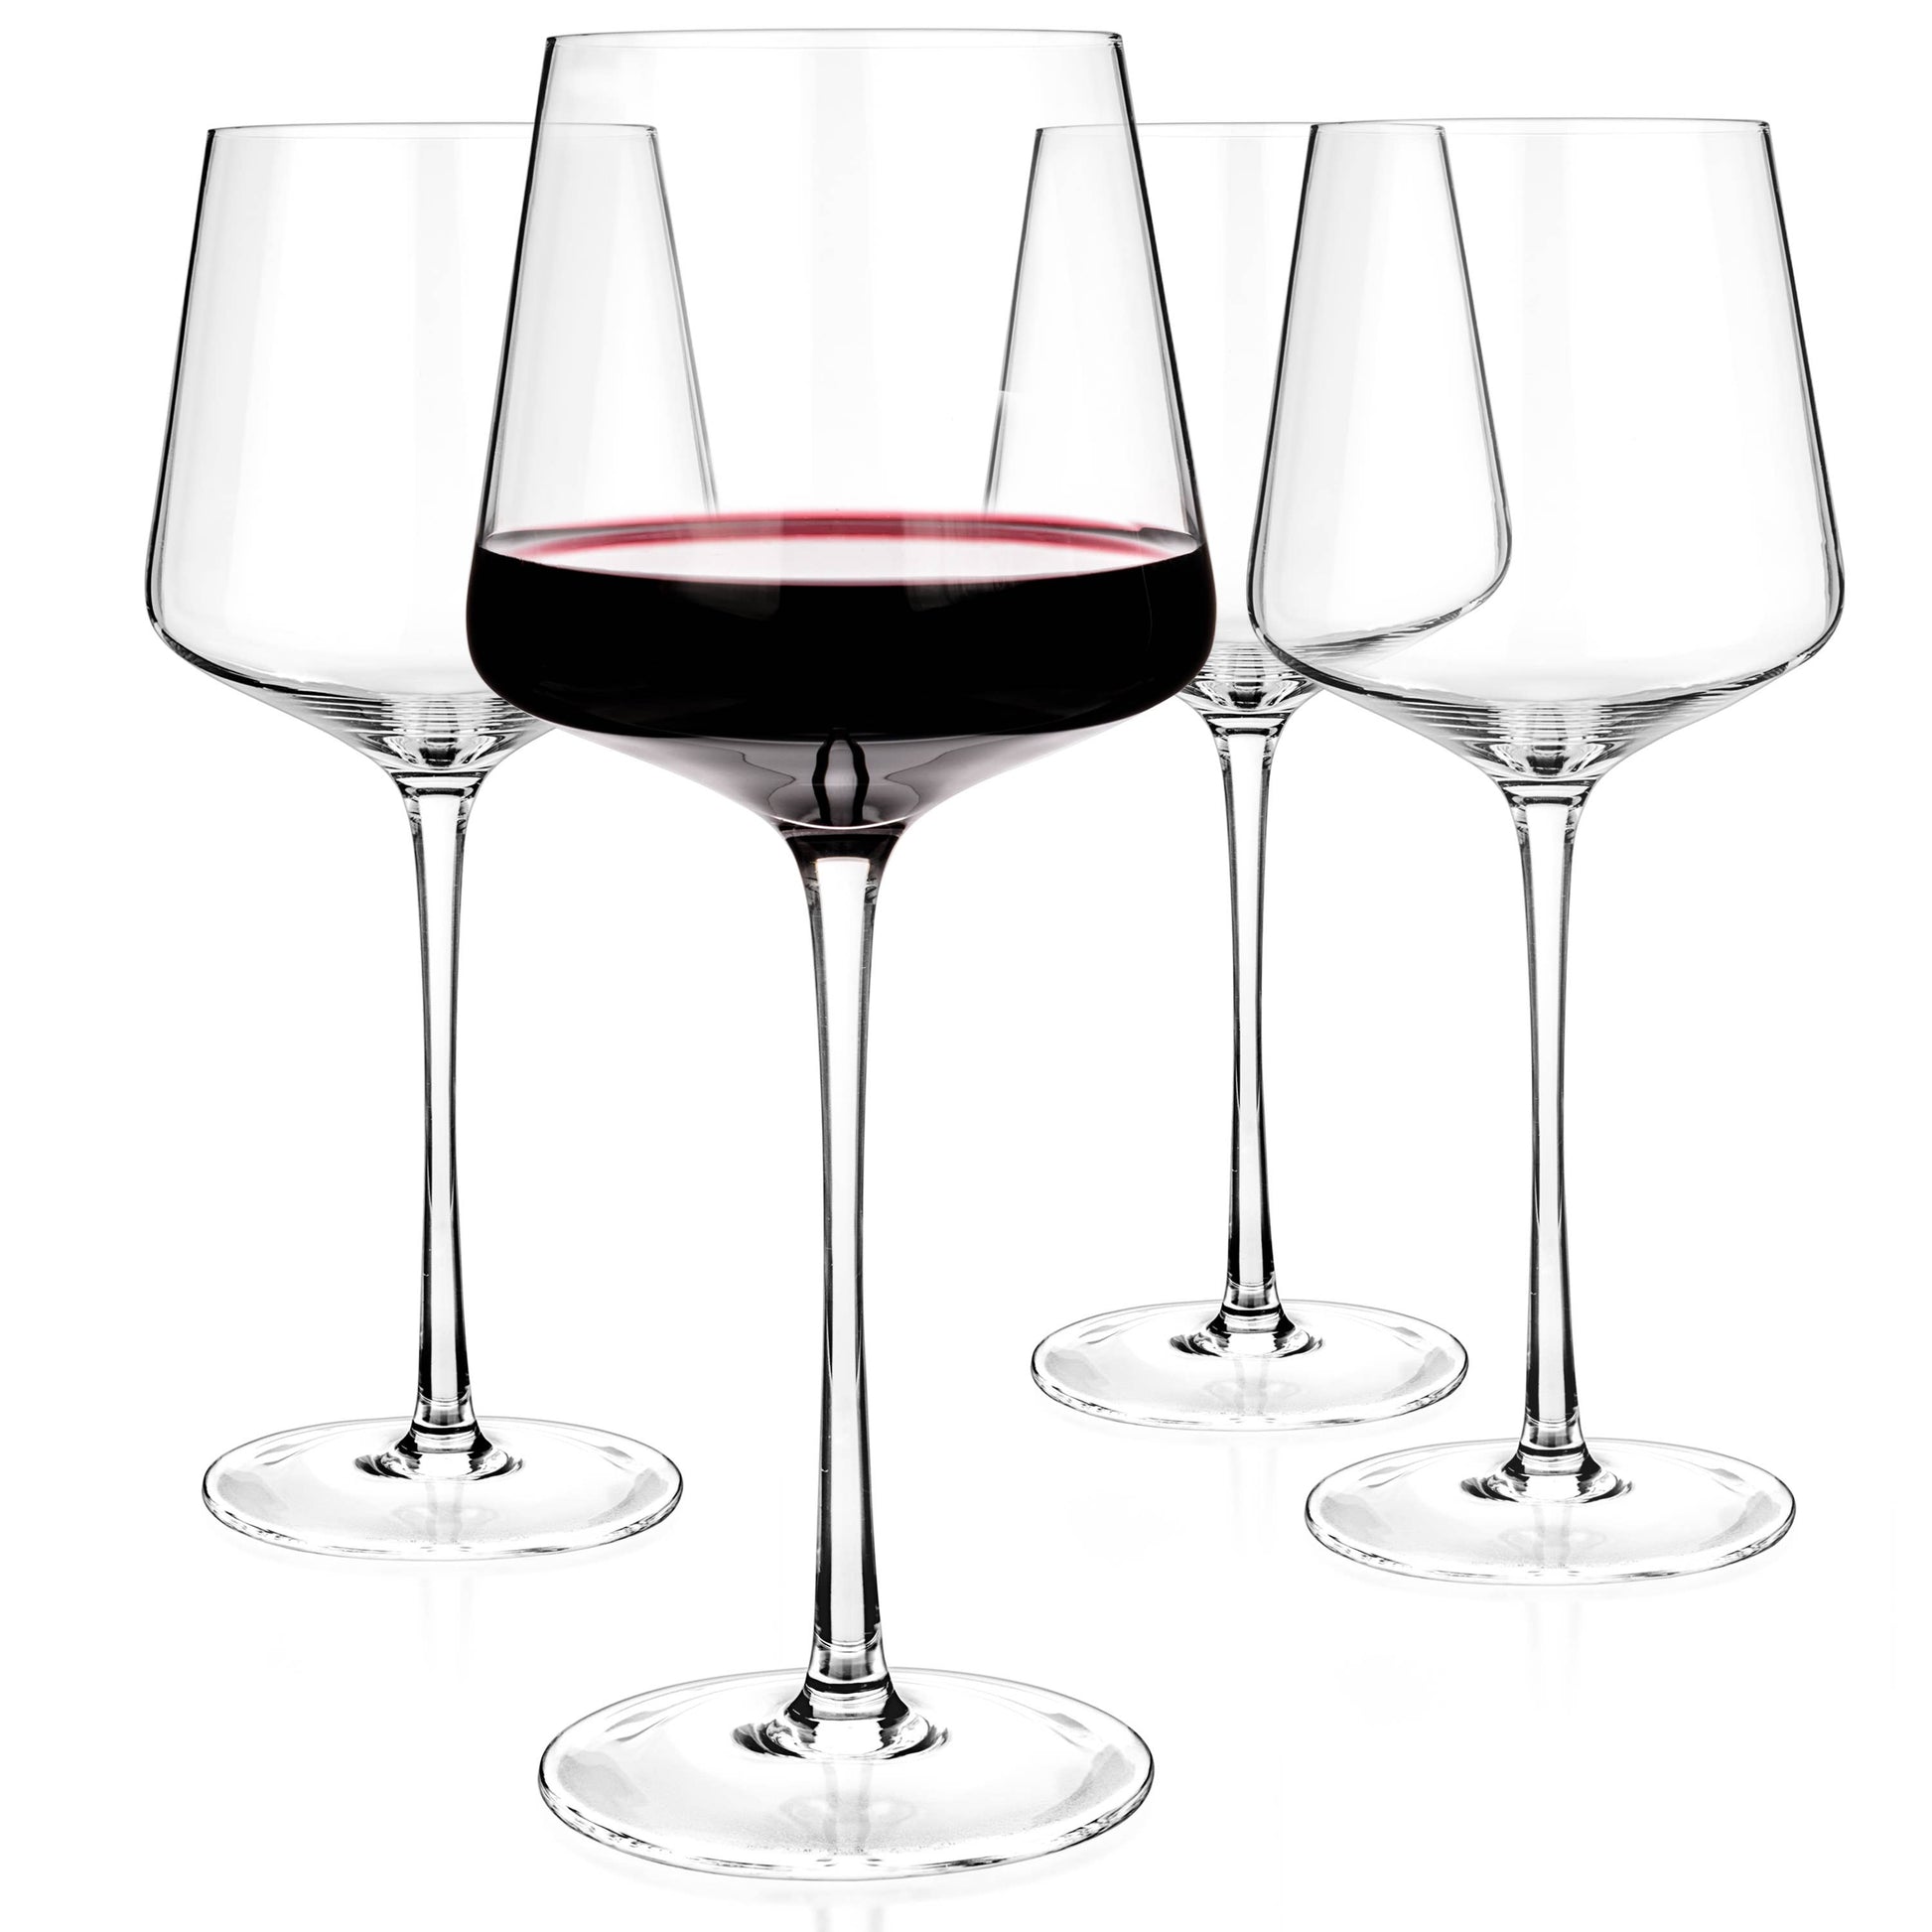 luxbe - wine crystal glasses set of 4/6, 20.5 oz large tall